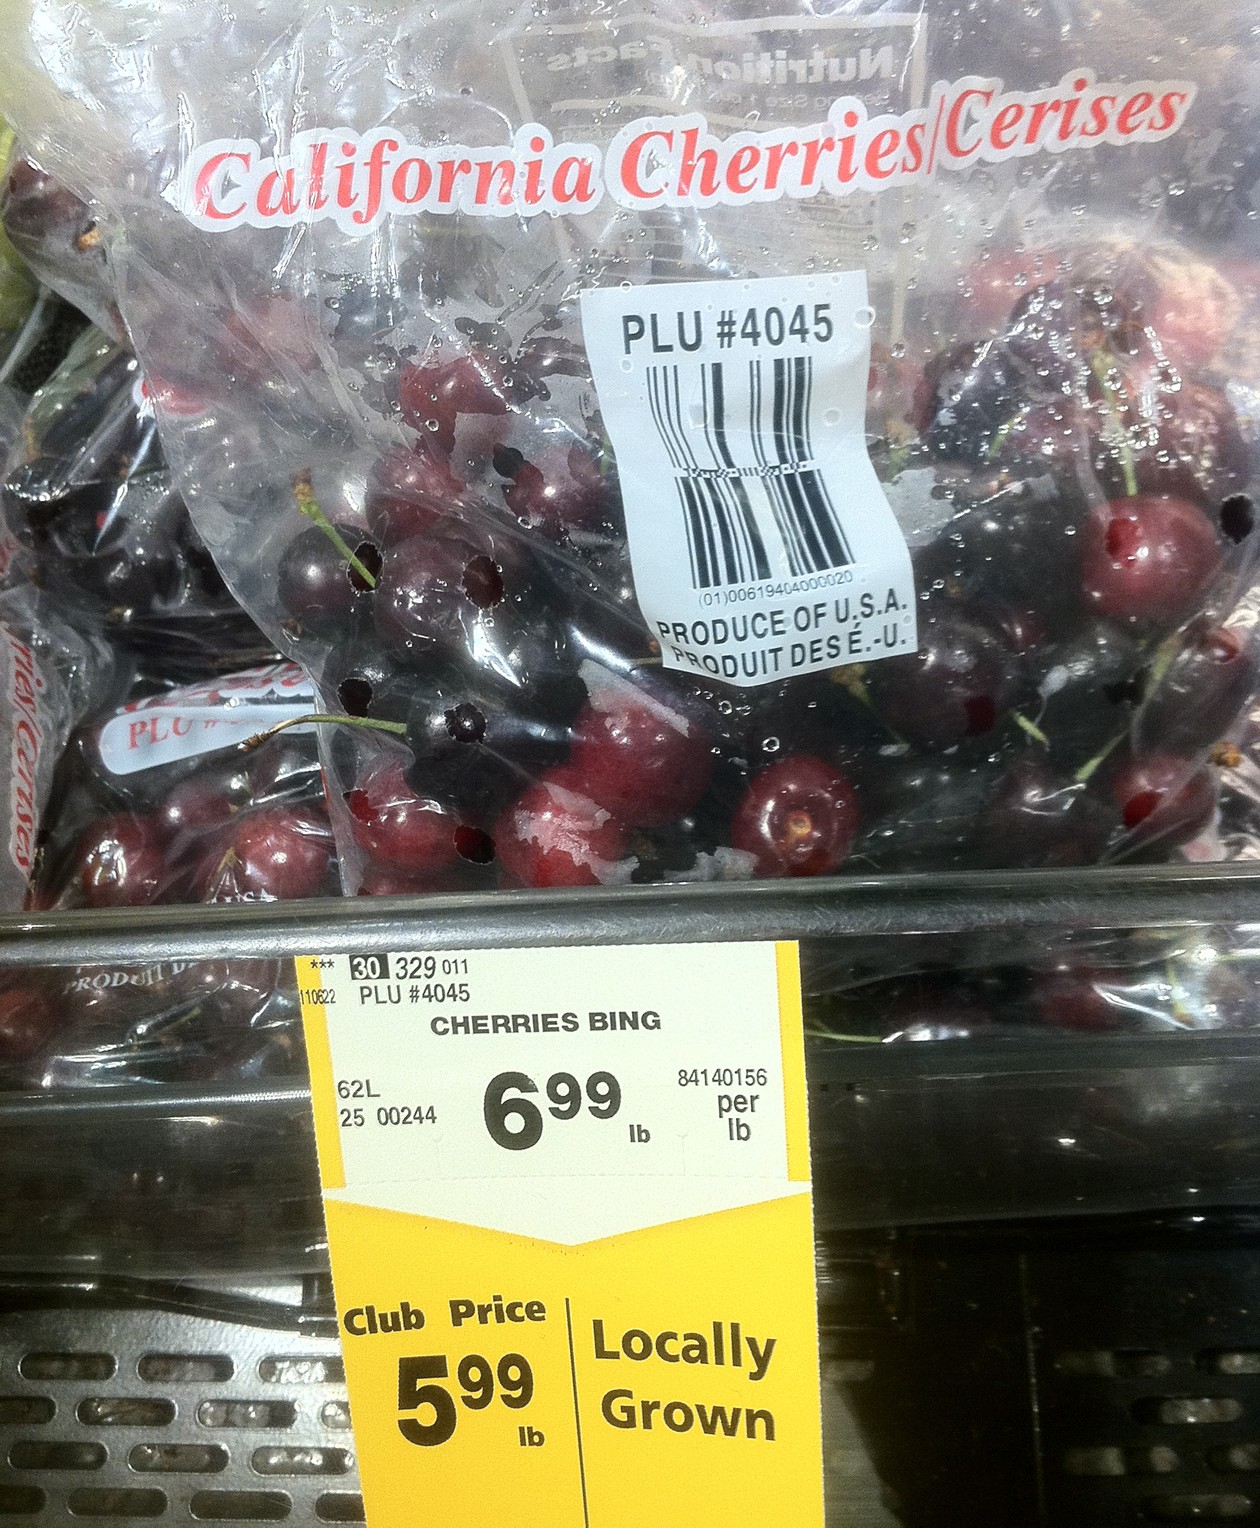 "Locally grown" cherries - from Bakersfield - PHOTO BY BOB DORAN